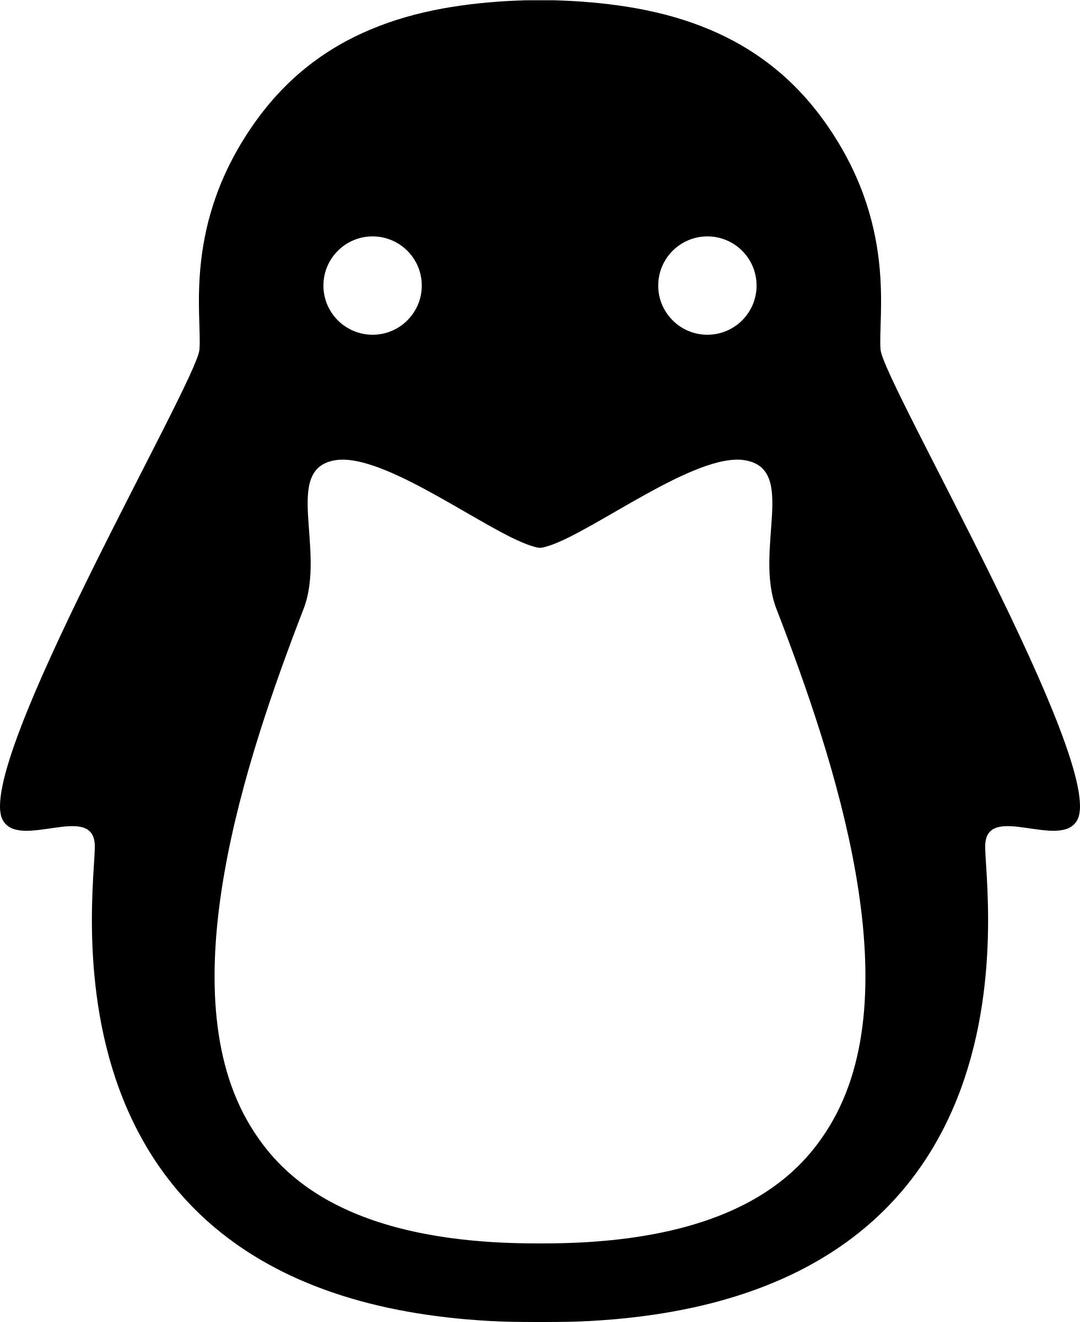 The Other Linux Logo png transparent